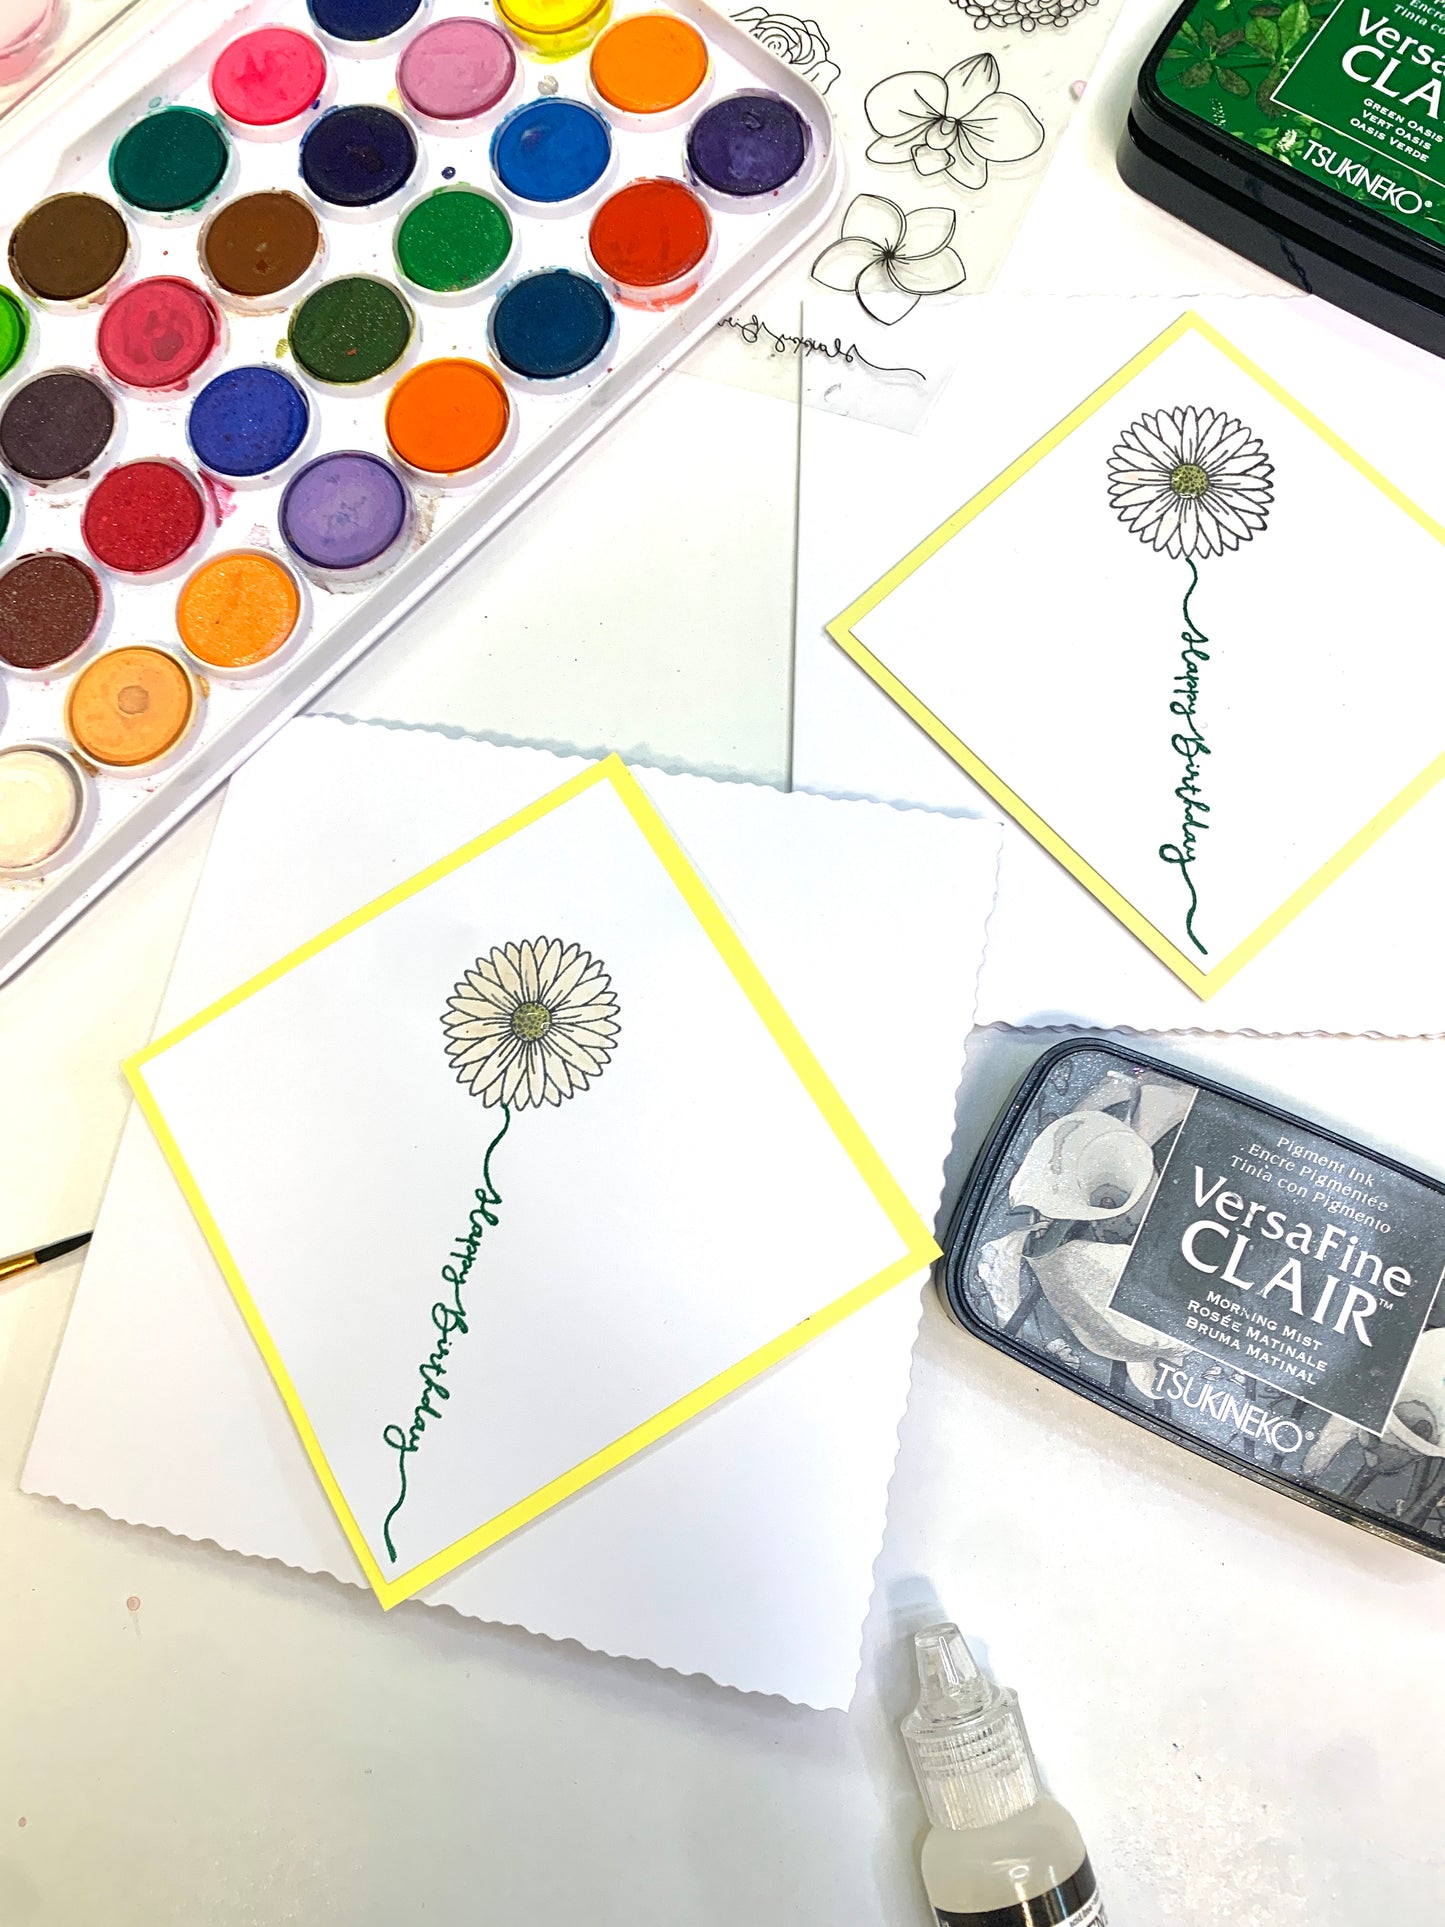 Flower Heads and Sentiments Stamp Set